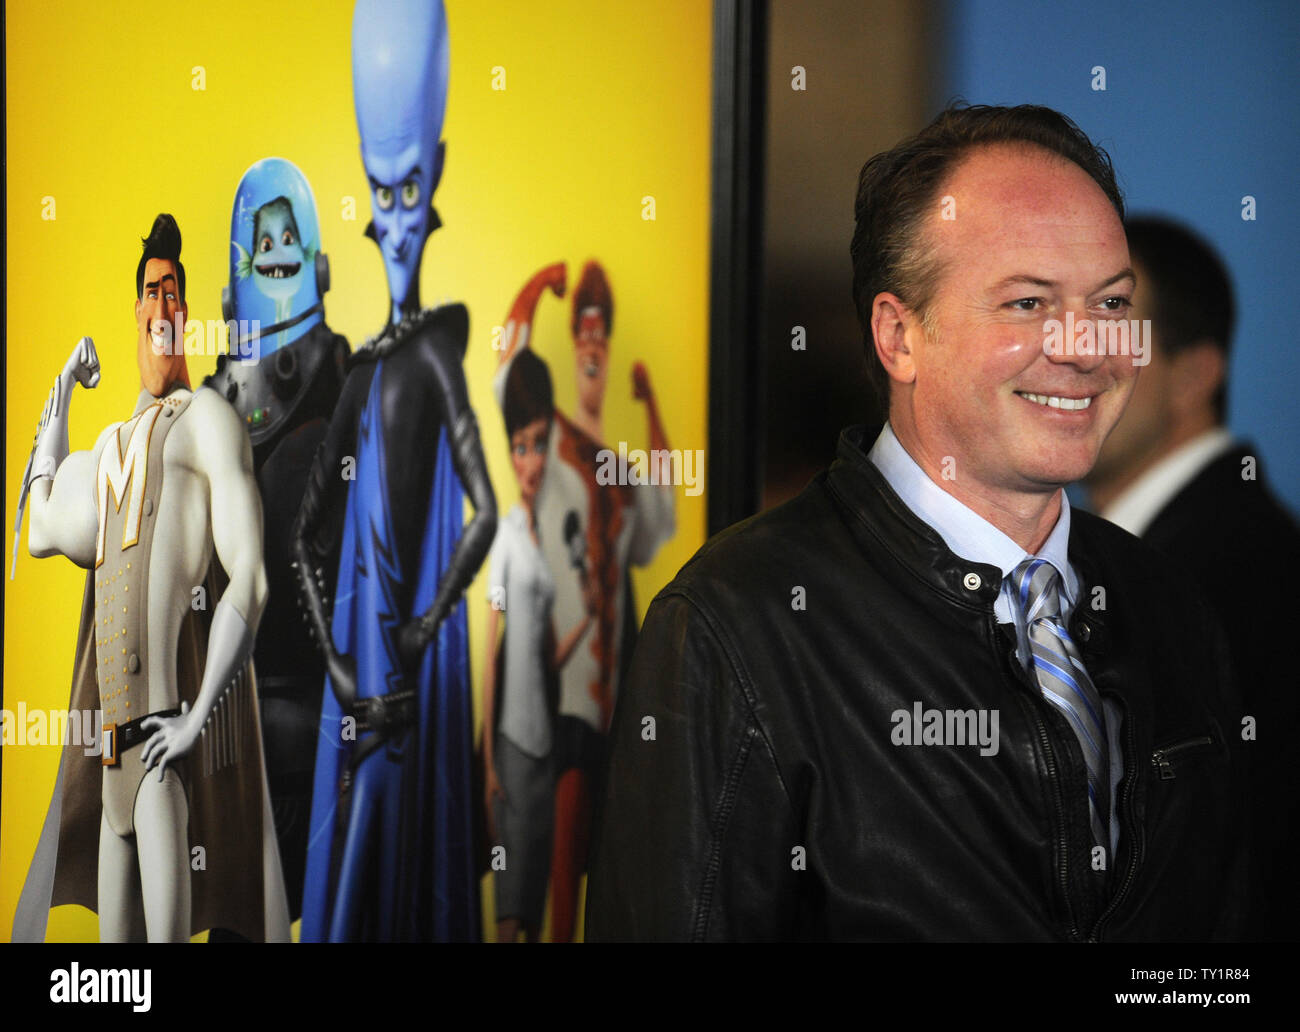 The director of  the Dreamworks animated film 'Megamind', Tom McGrath, attends the premiere in the Hollywood section of Los Angeles on October 30, 2010.      UPI/Phil McCarten Stock Photo